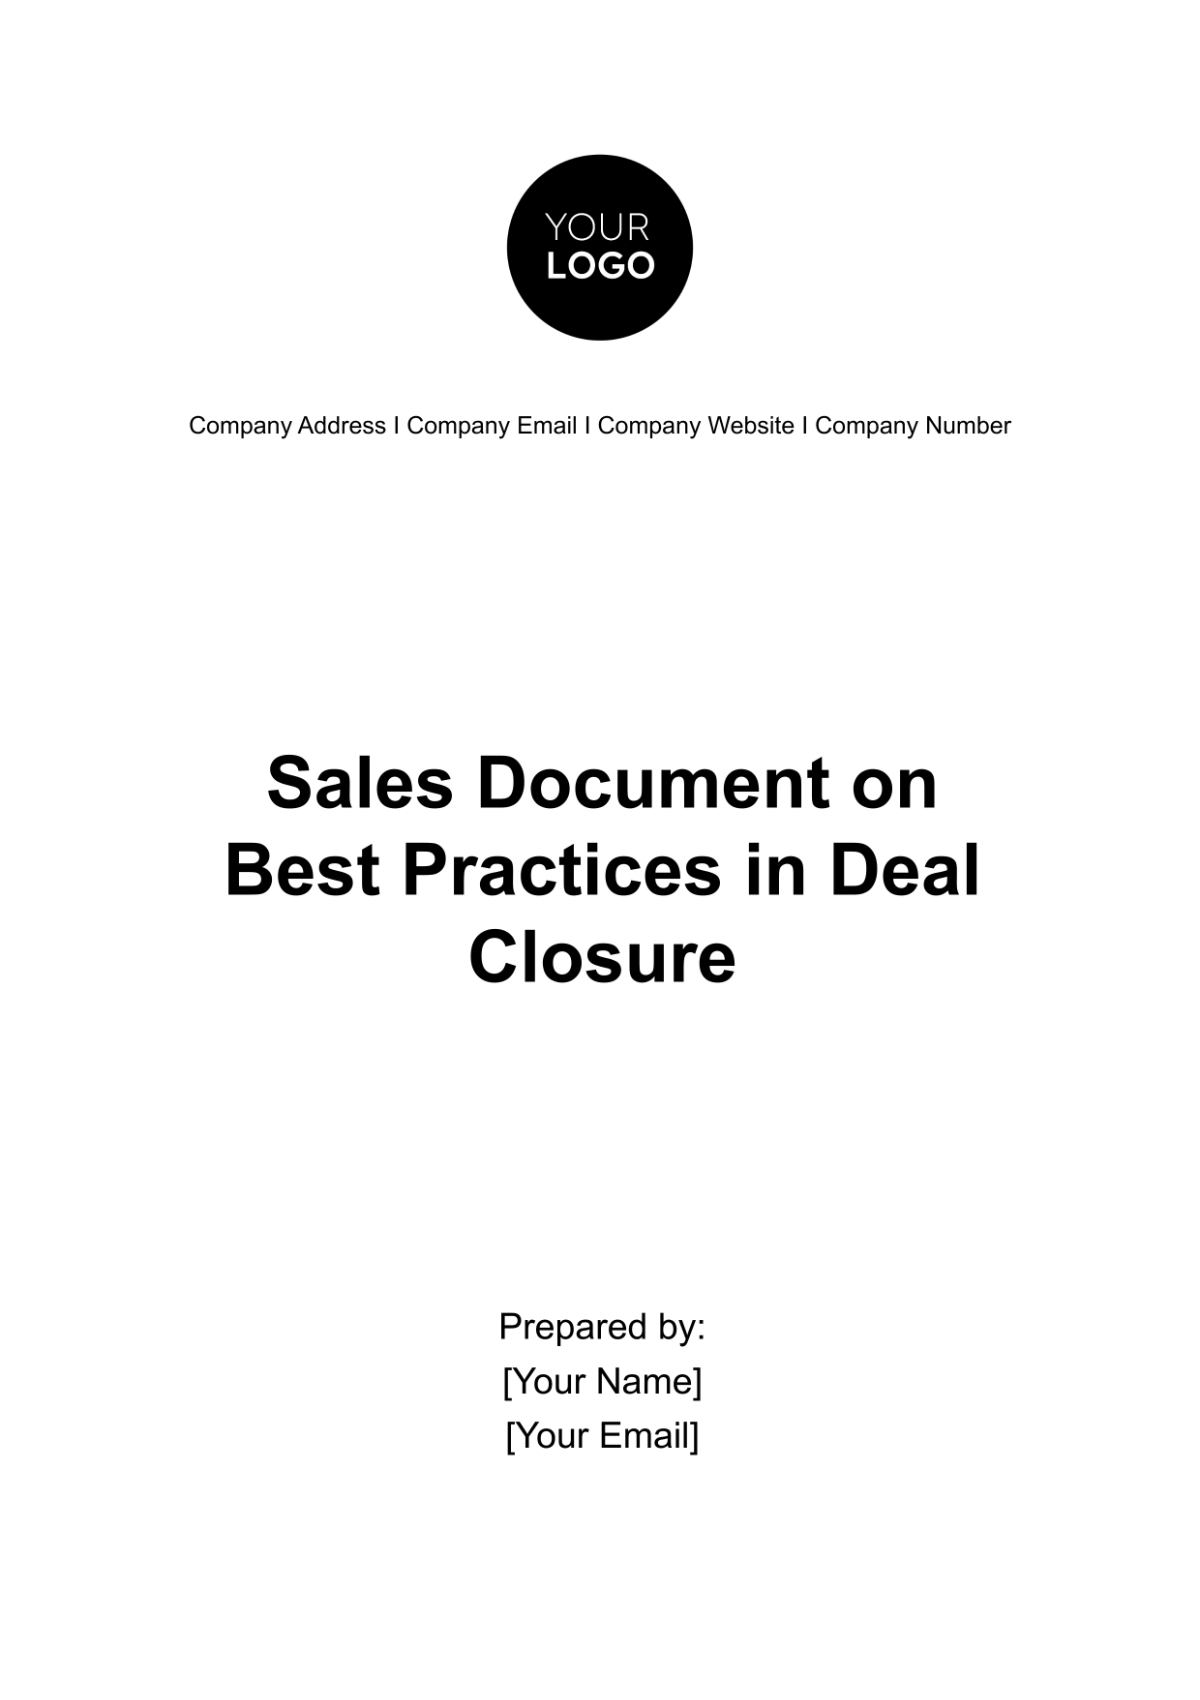 Free Sales Document on Best Practices in Deal Closure Template